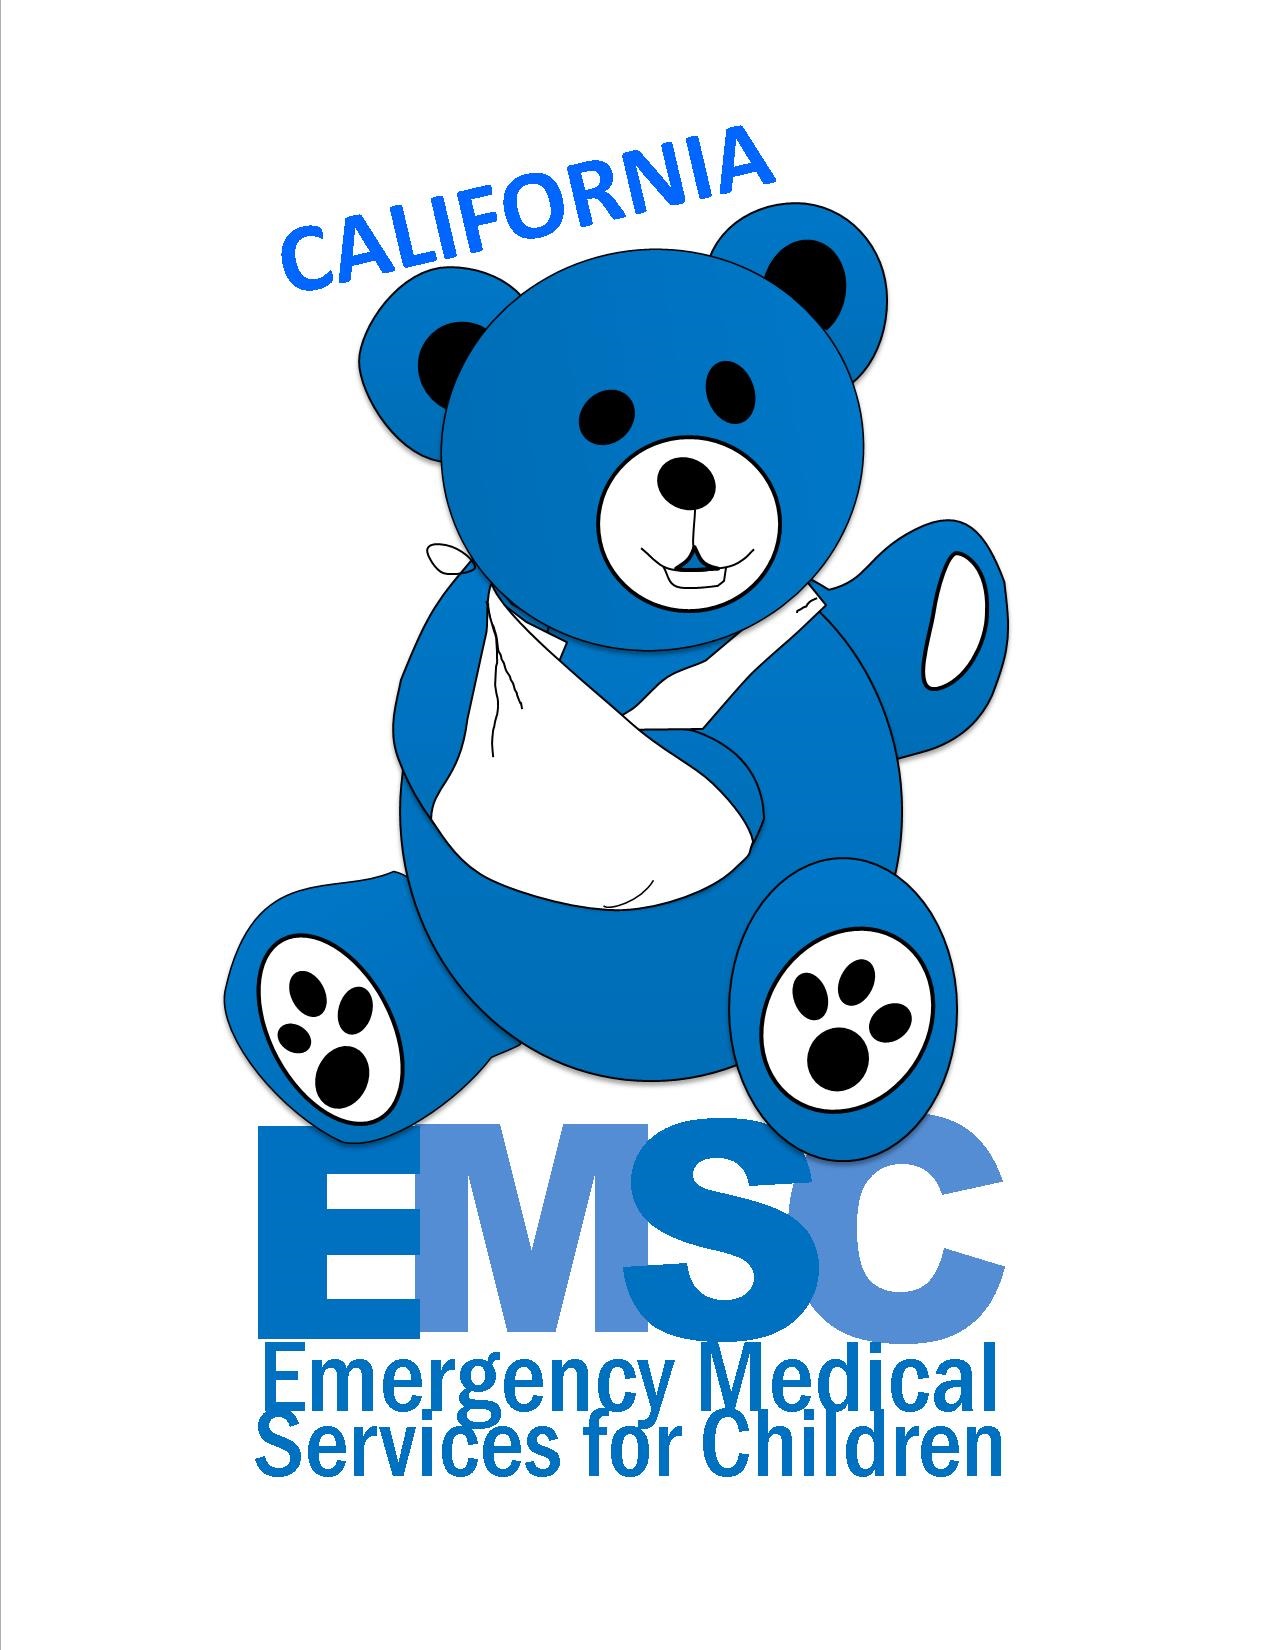 California Emergency Medical Services for Children